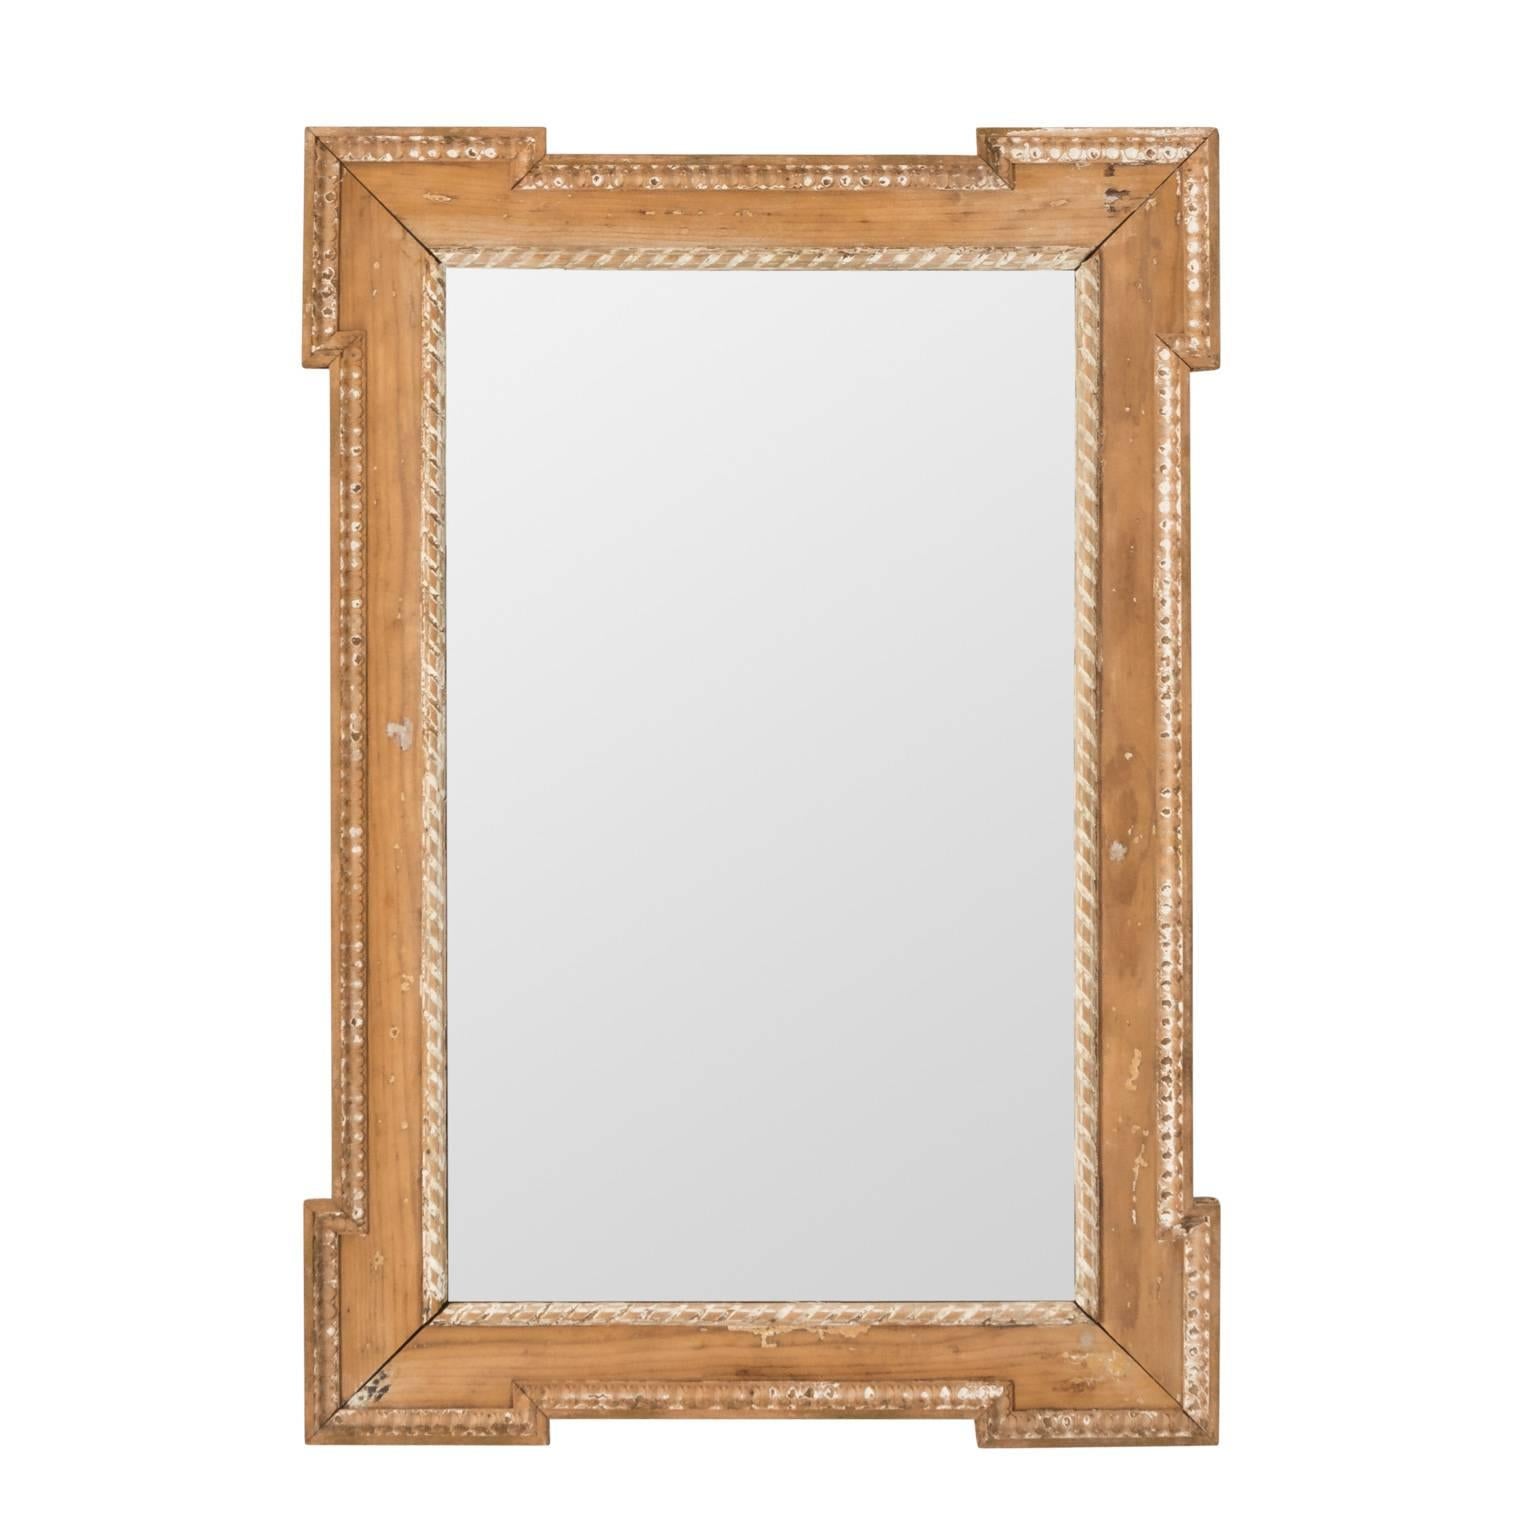 Pair of pine mirrors with dog ear corners, circa late 19th century.
   